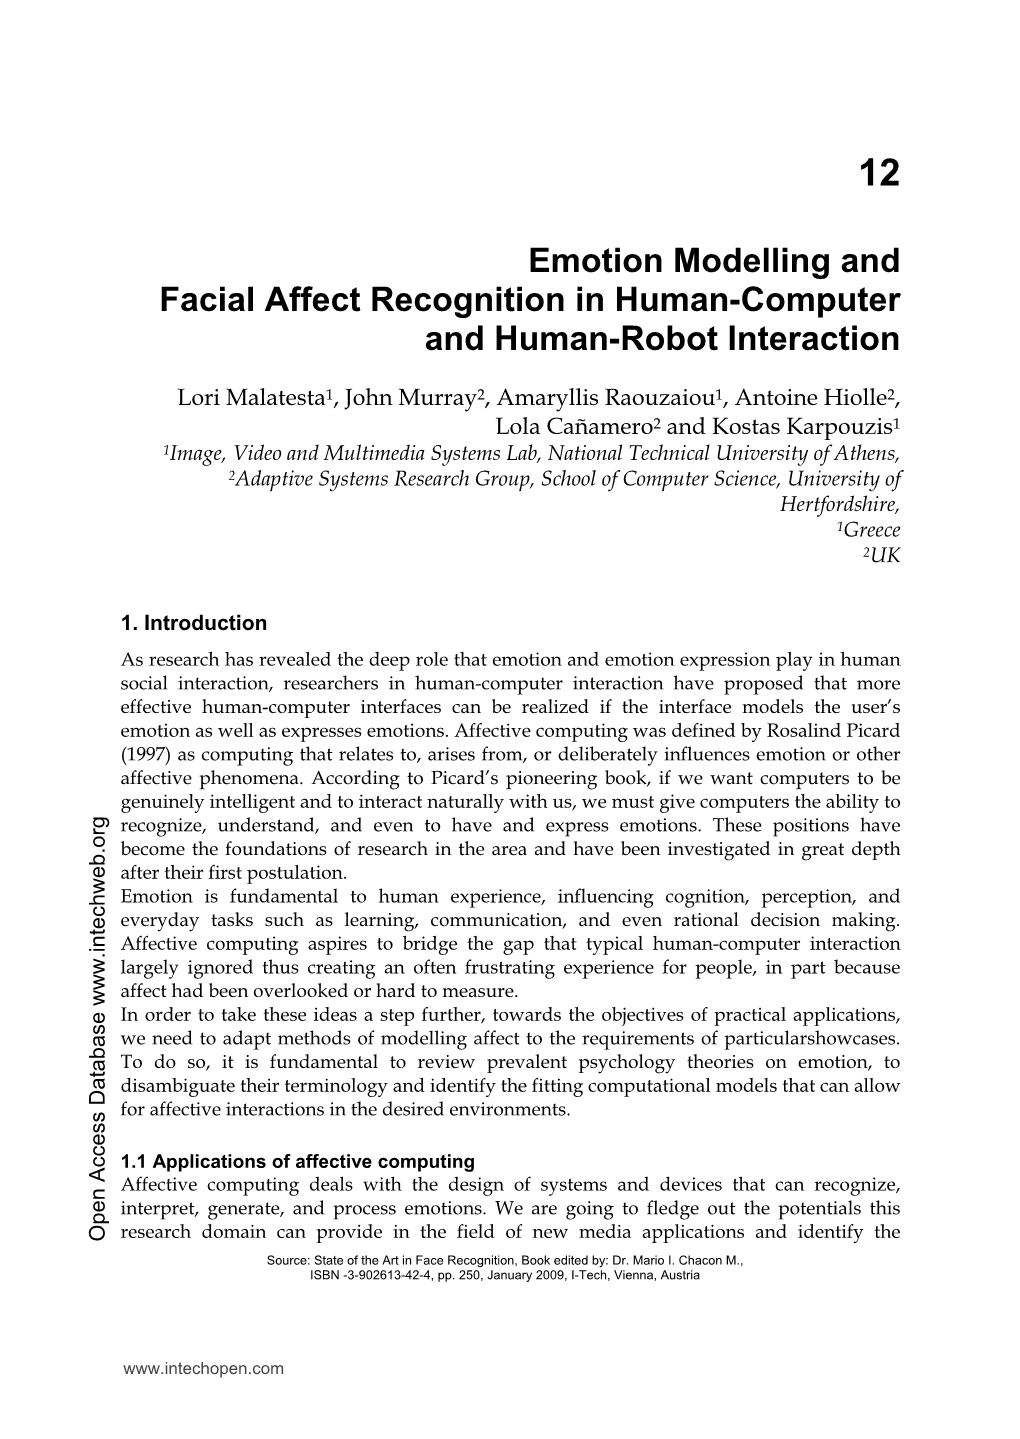 Emotion Modelling and Facial Affect Recognition in Human-Computer and Human-Robot Interaction